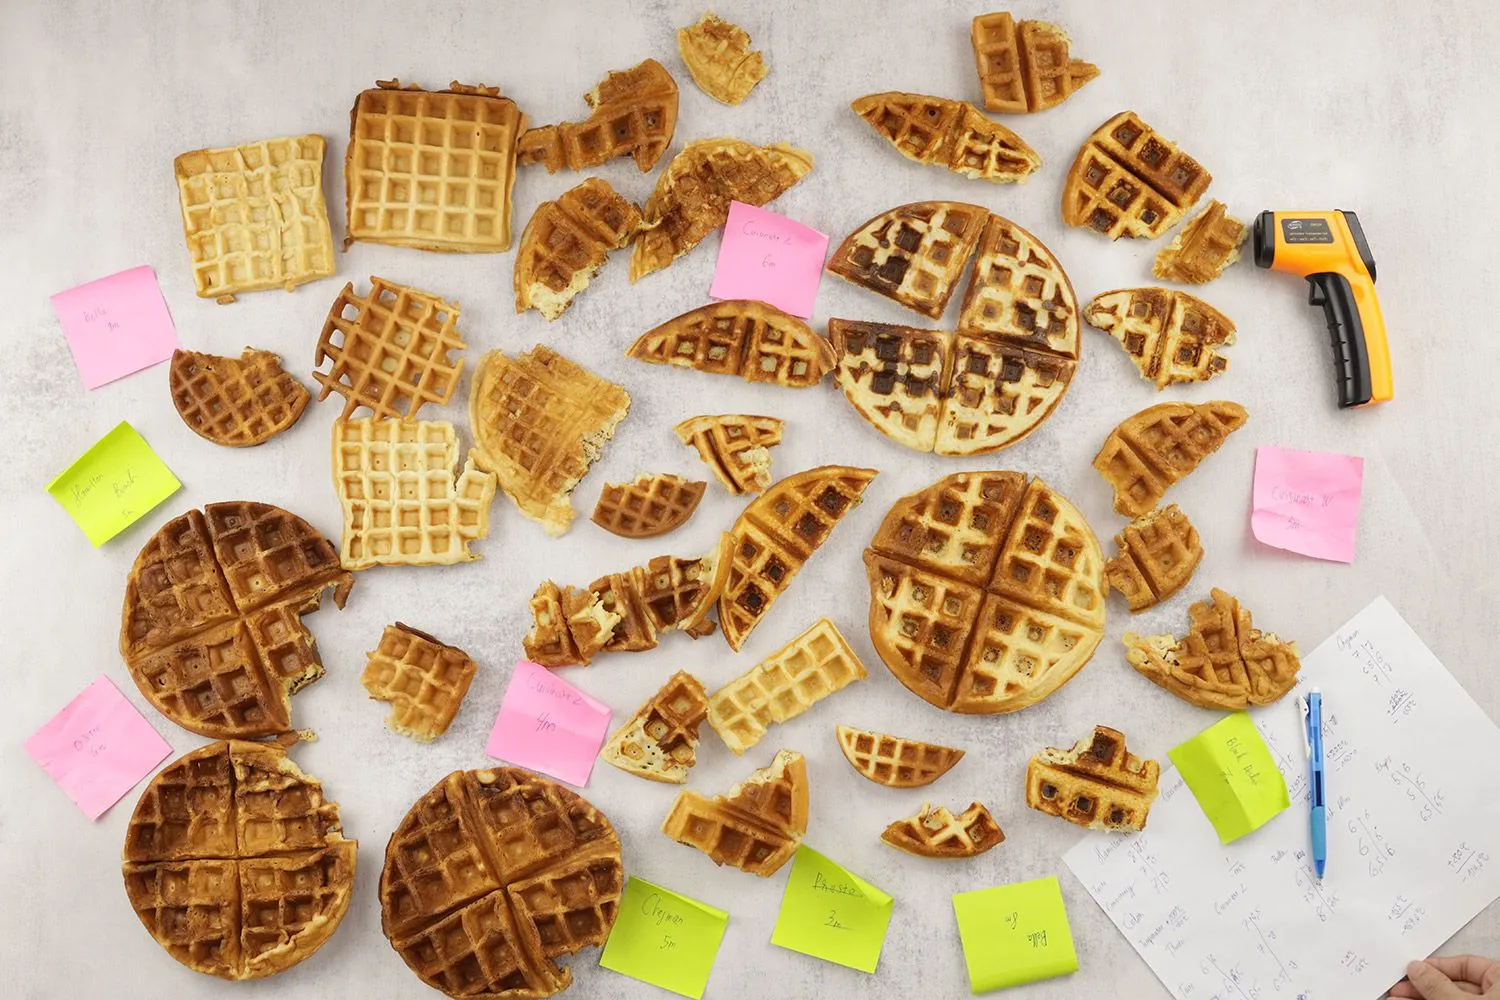 20 unique waffle makers you didn't know you could buy - Reviewed